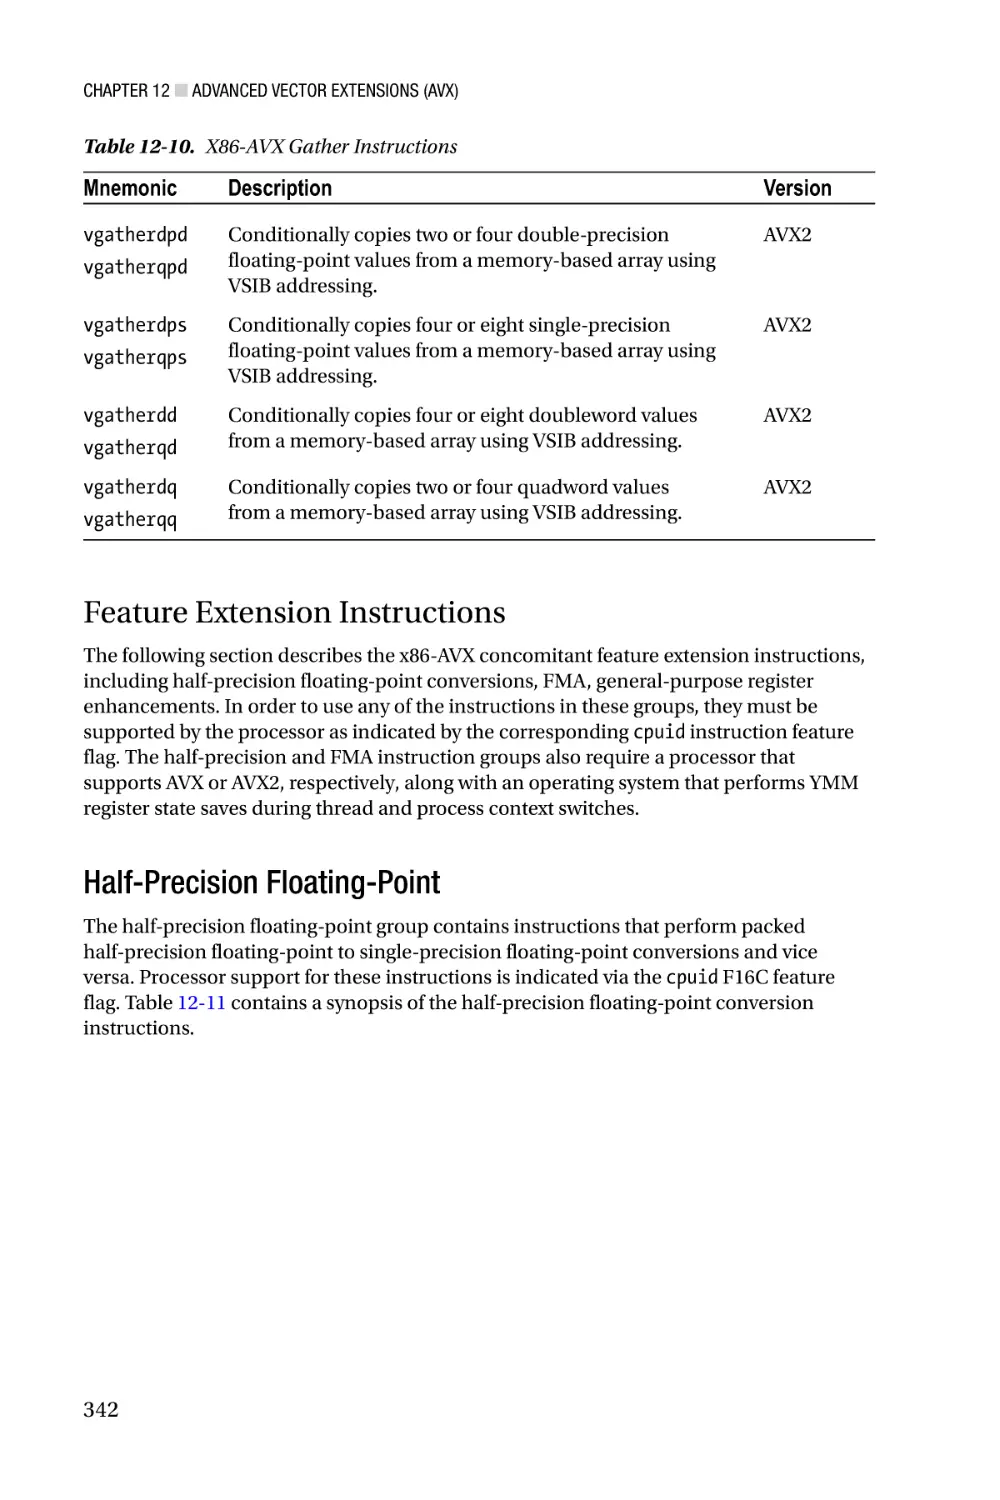 Feature Extension Instructions
Half-Precision Floating- Point